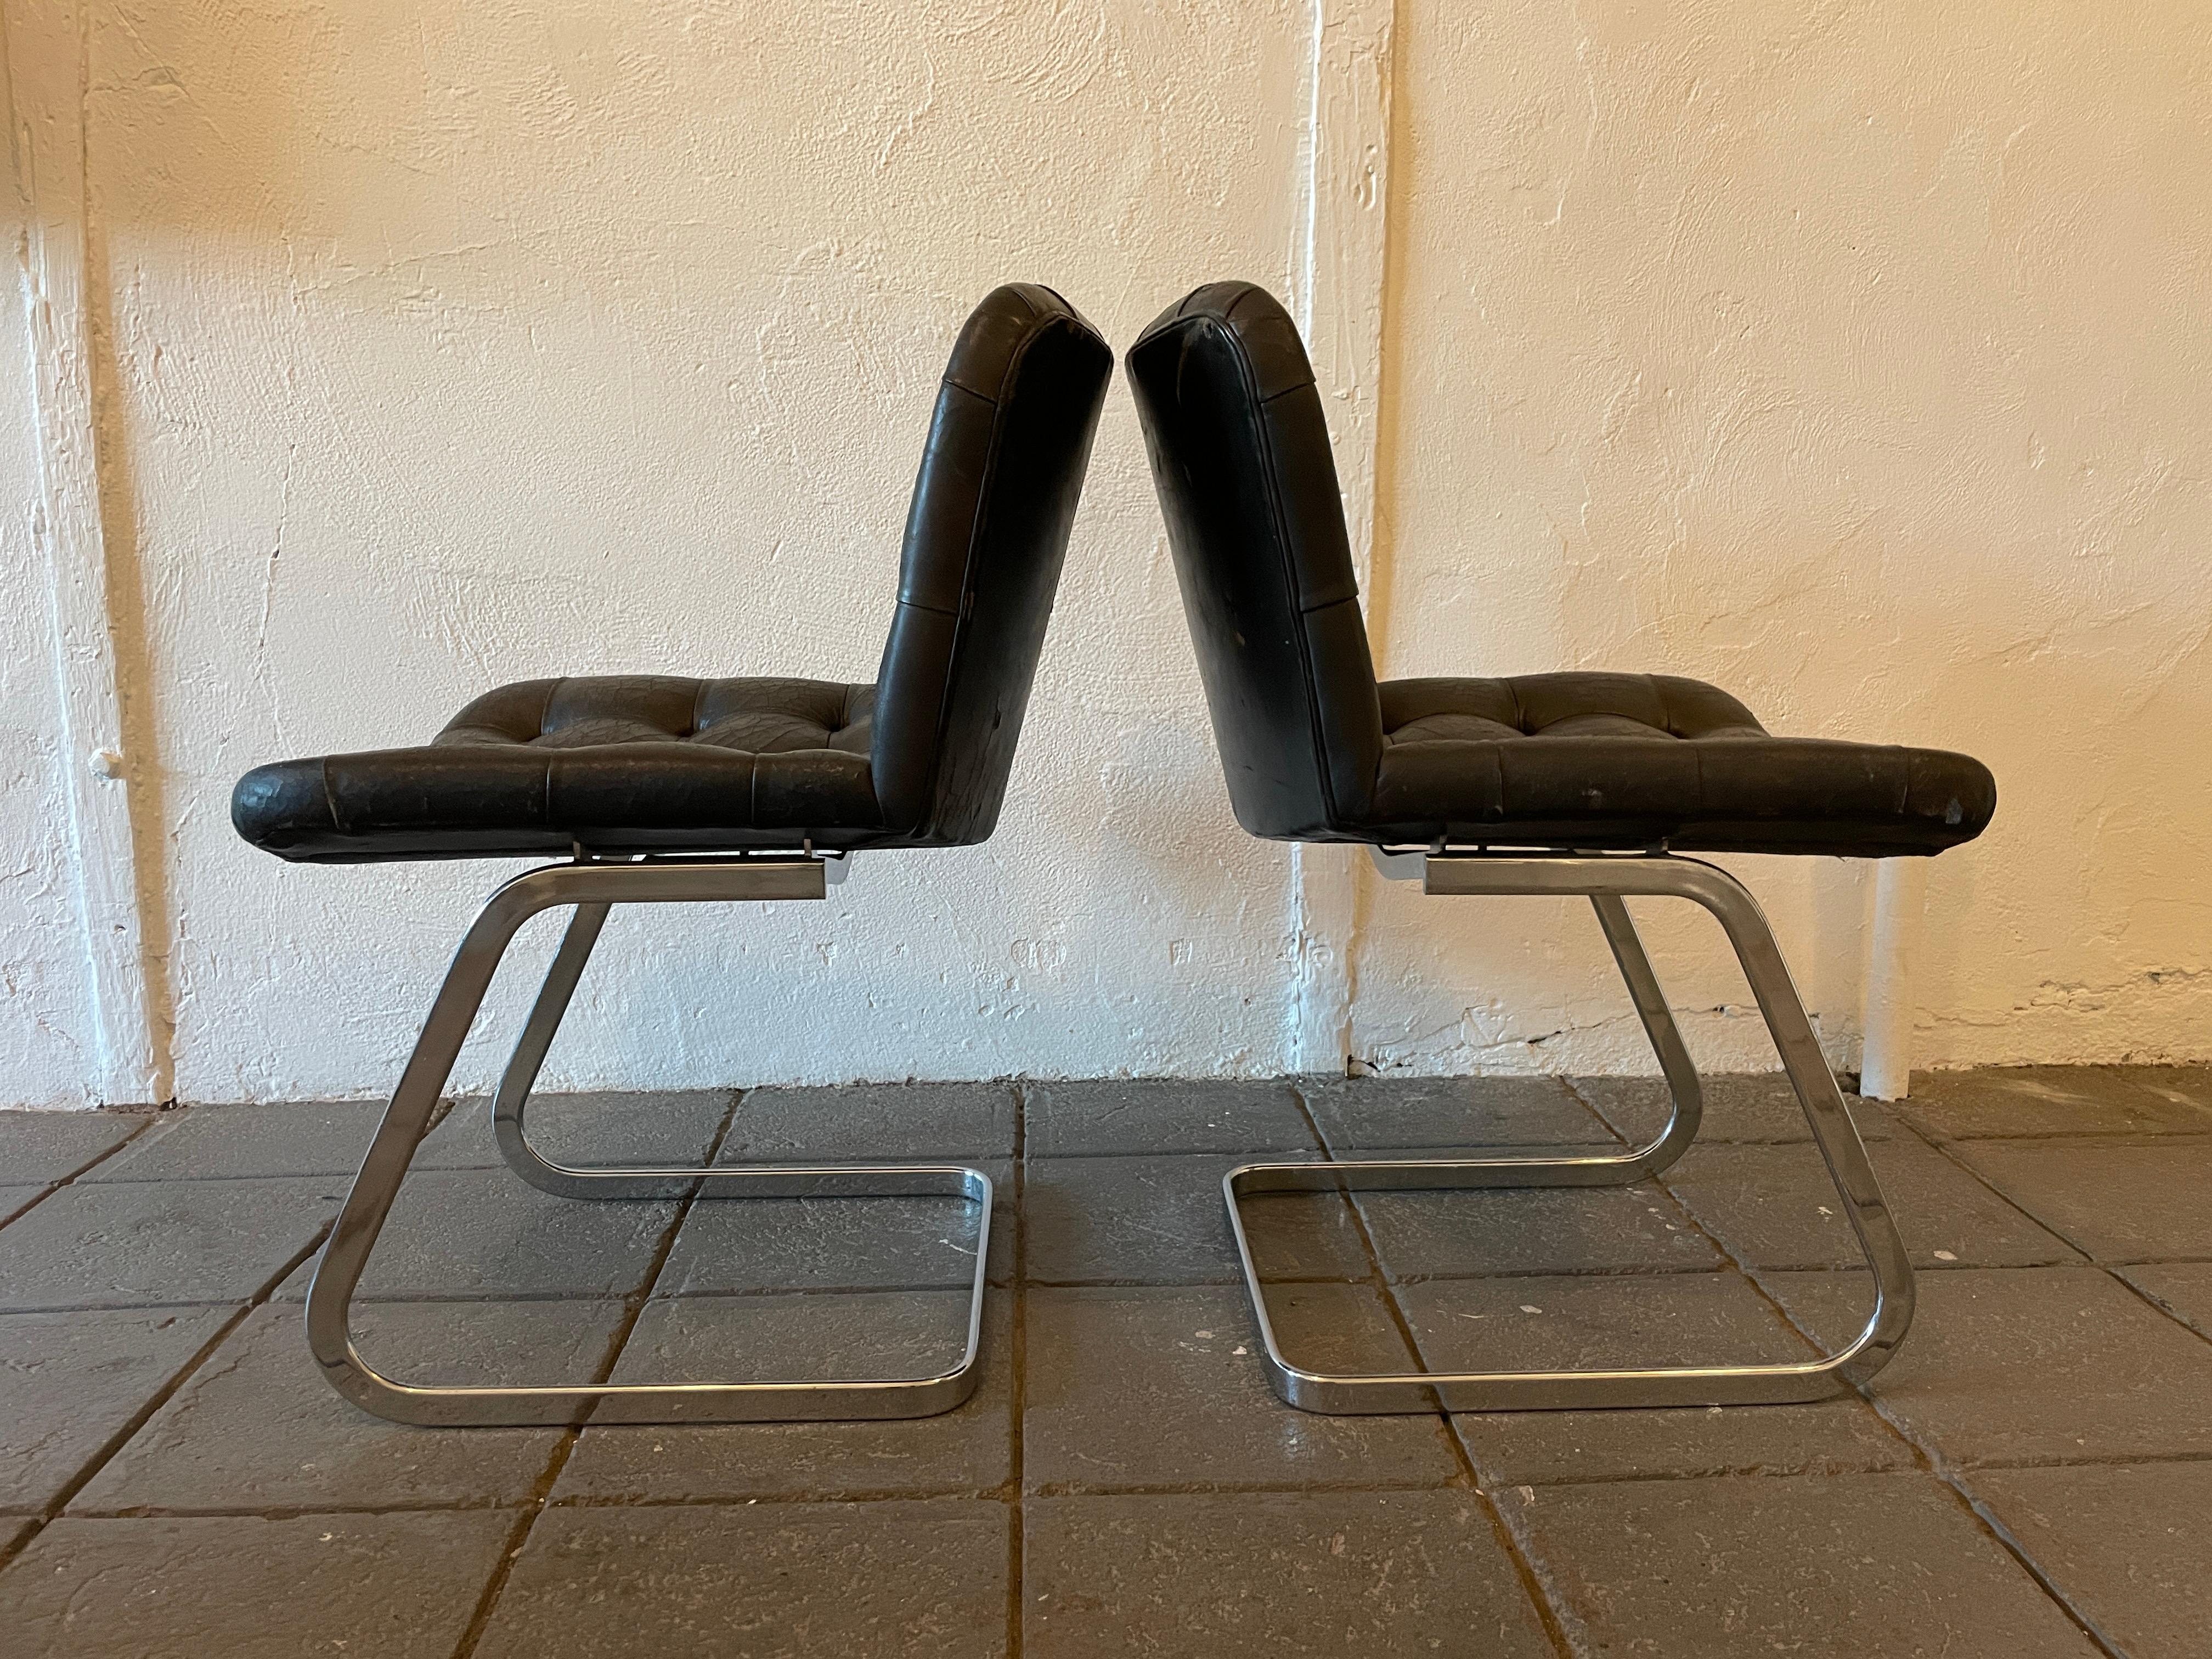 A unique set of (2) RH-304 leather chairs
designed by Robert Haussmann and manufactured by Stendig / de sede. This set is hand built in the 1960s, these chairs are upholstered in black leather with some cracks. The frames are made of chrome-plated